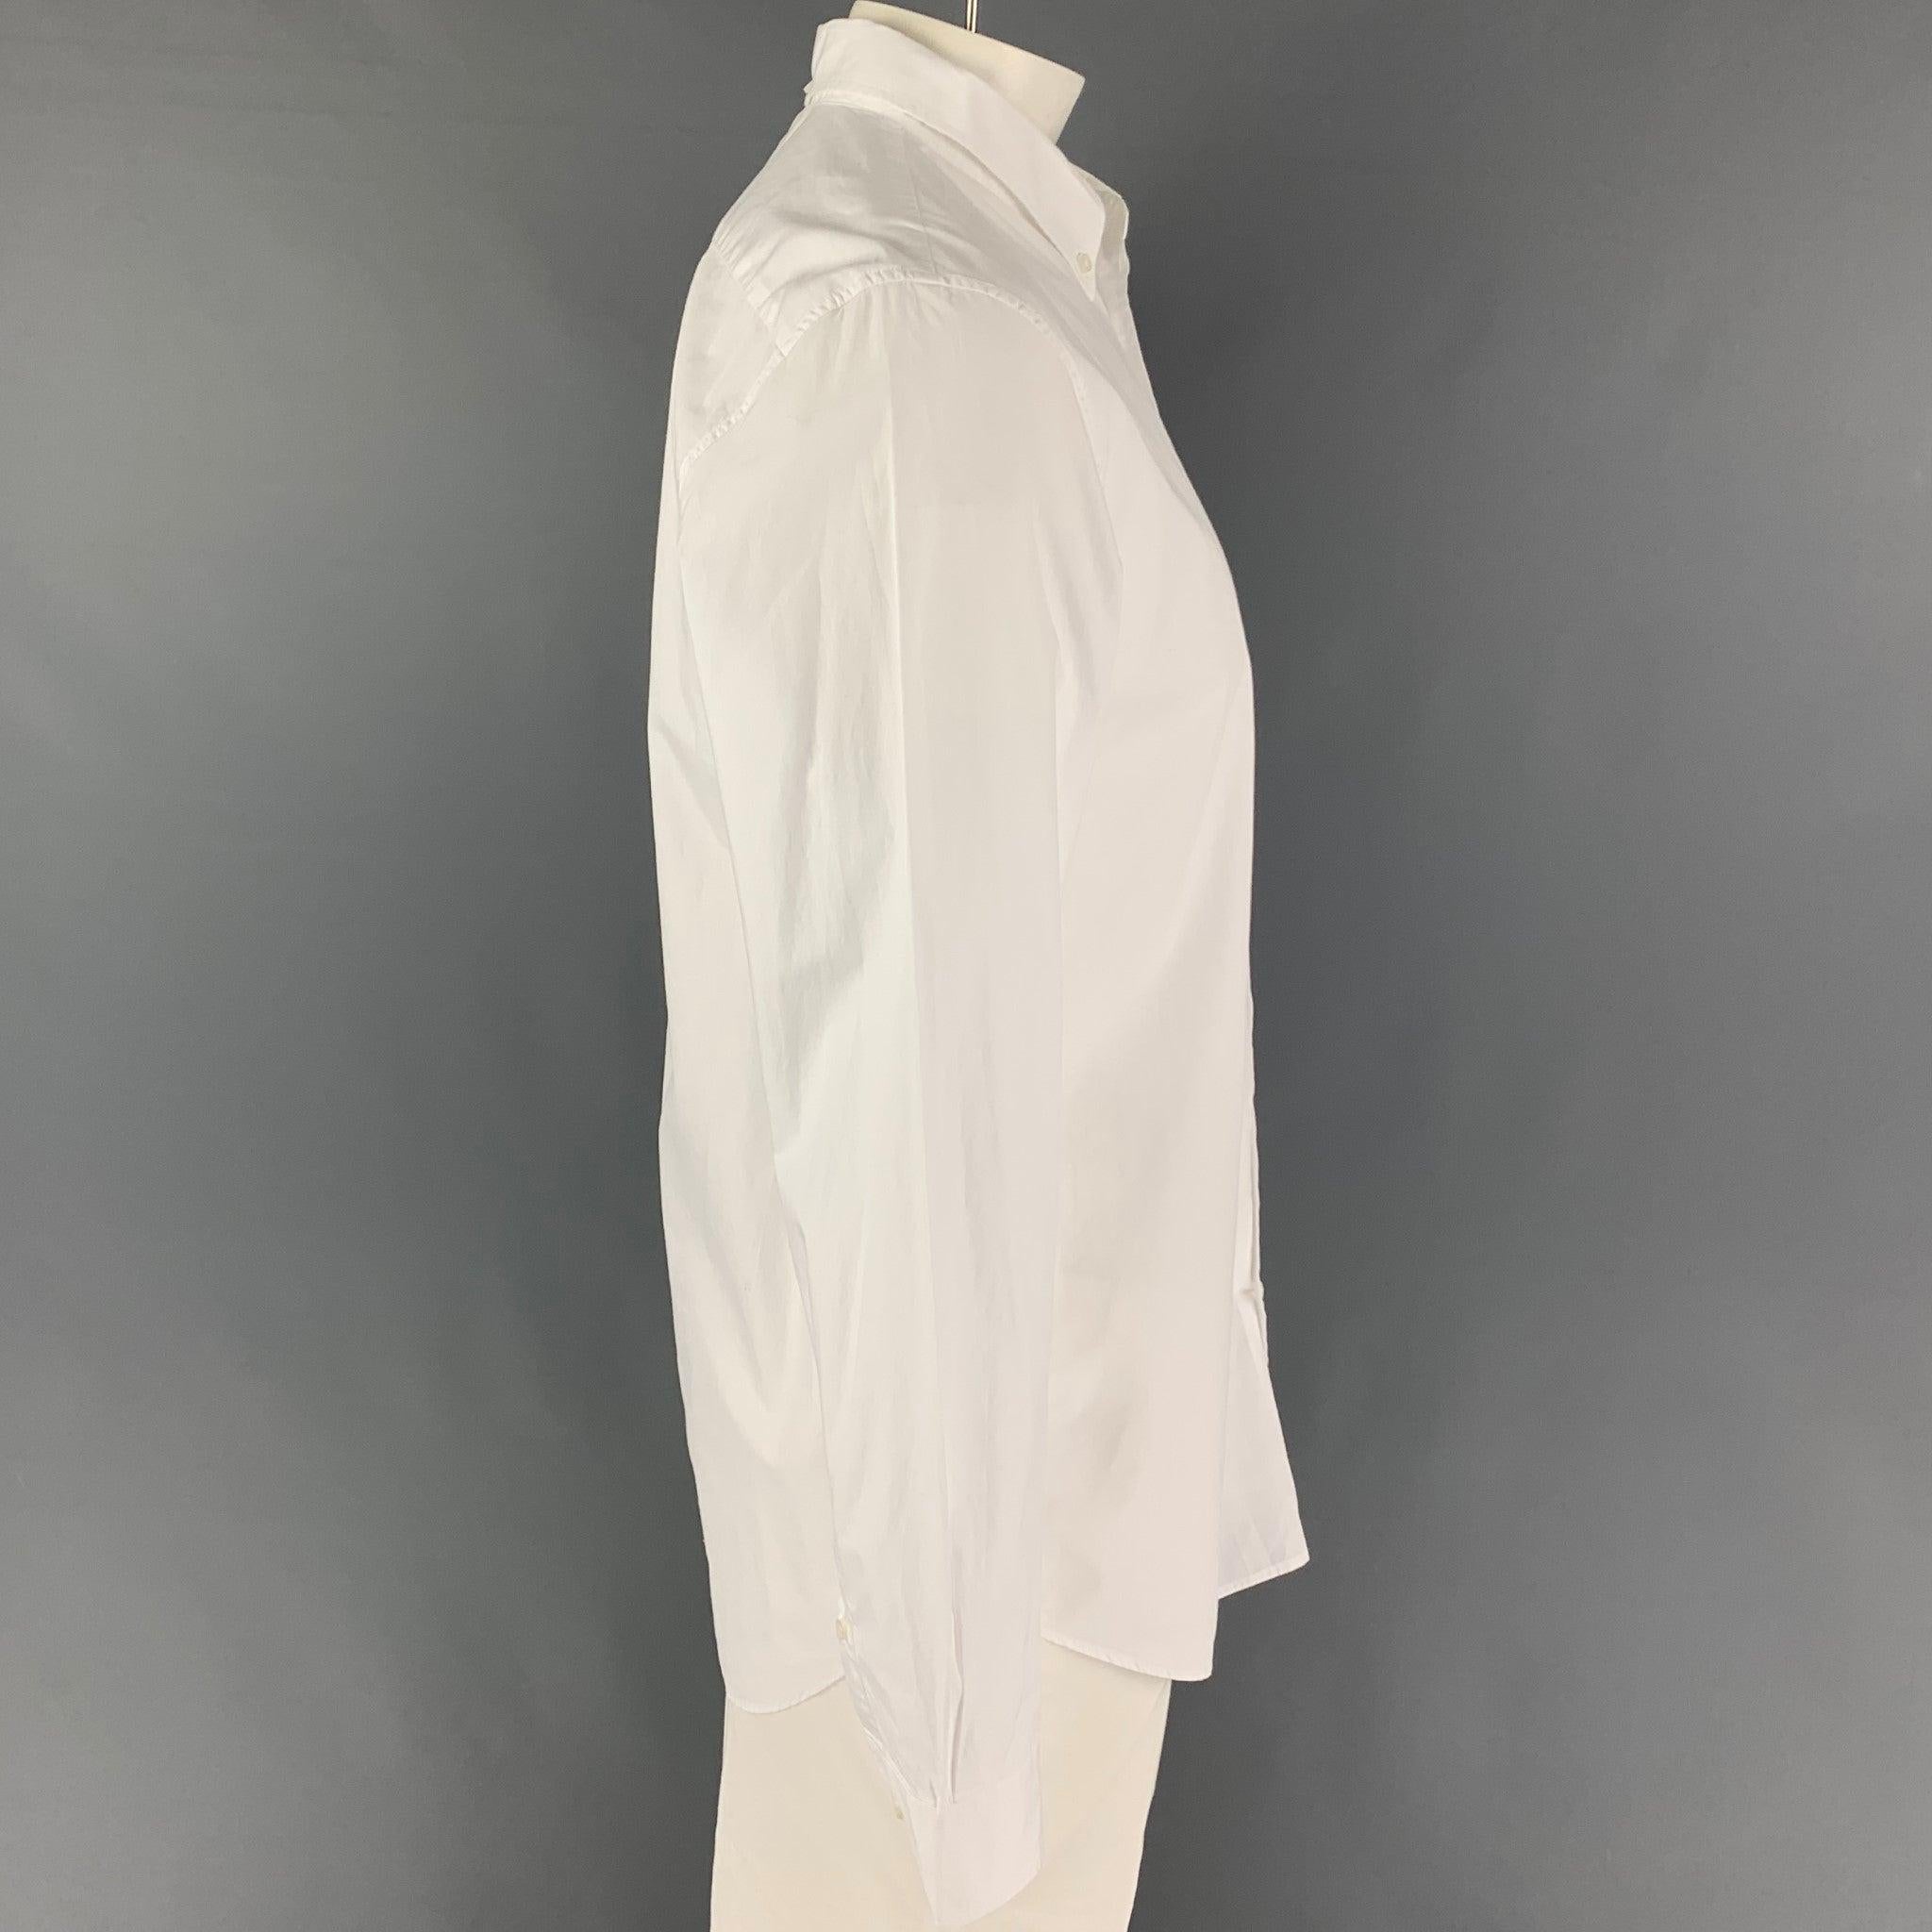 MARC JACOBS long sleeve shirt comes in a white cotton featuring a classic style, button down collar, and a button up closure. Made in Italy.
Good
Pre-Owned Condition. Small mark at front. As-Is.  

Marked:   54 

Measurements: 
 
Shoulder: 19 inches